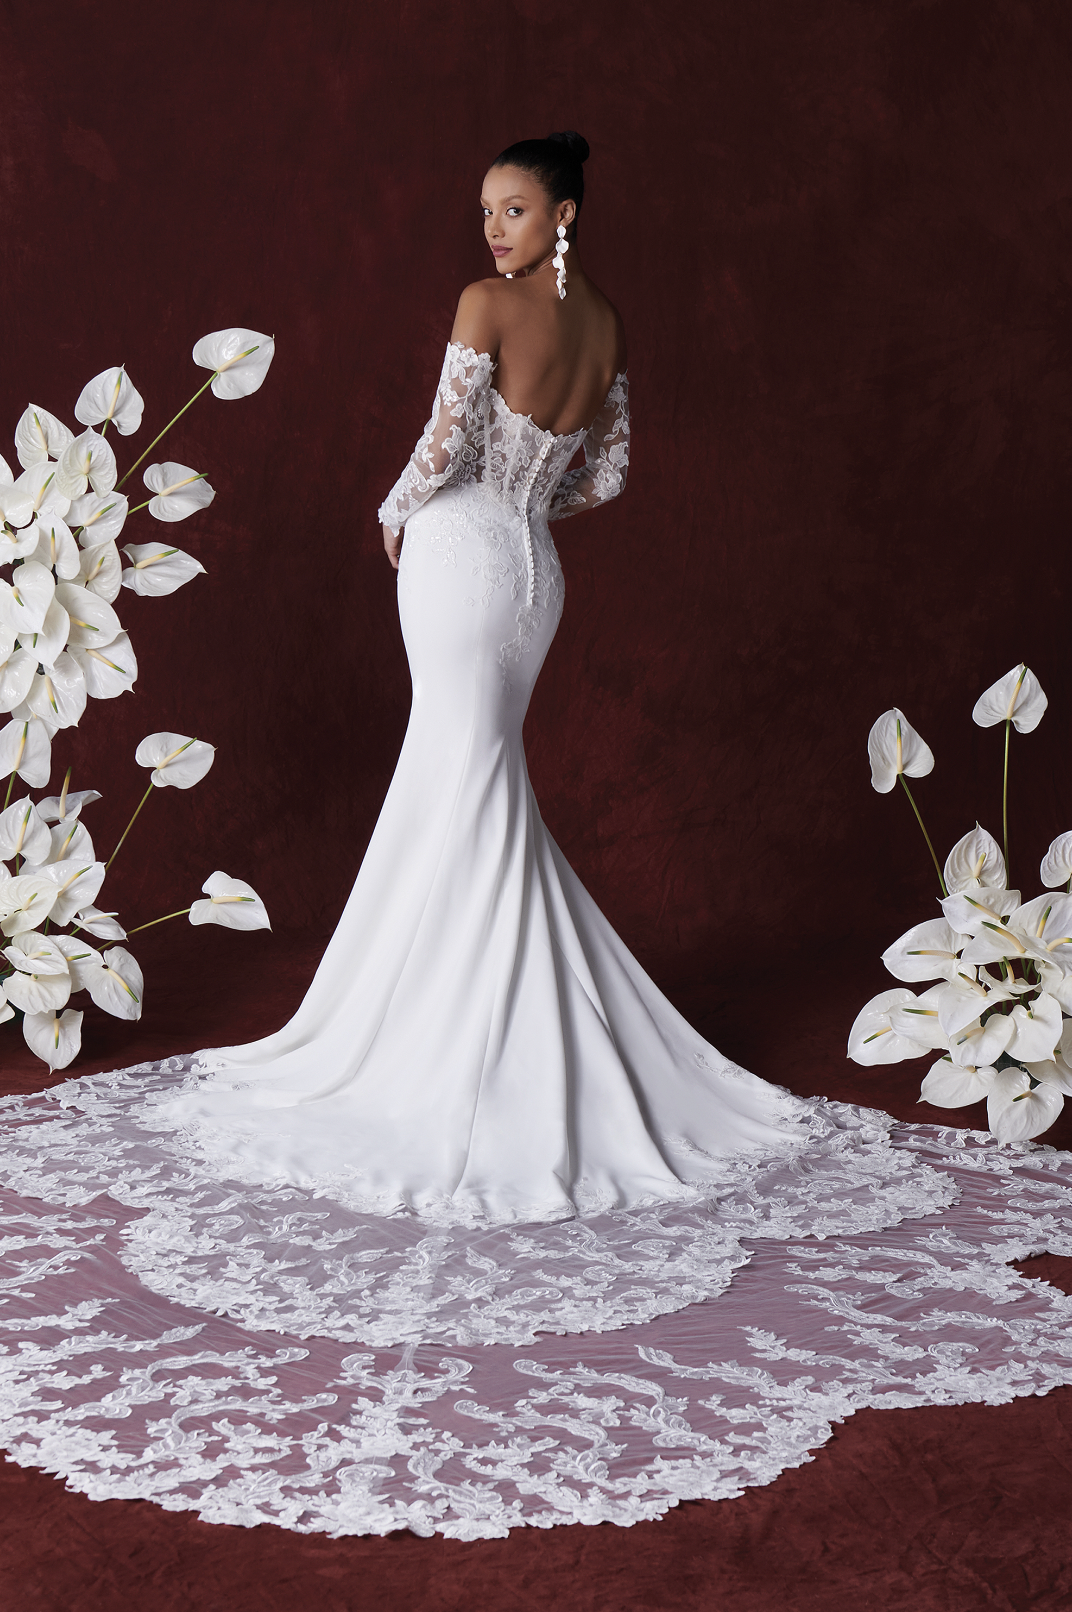 What are the new trends in wedding dresses? | Libelle Bridal